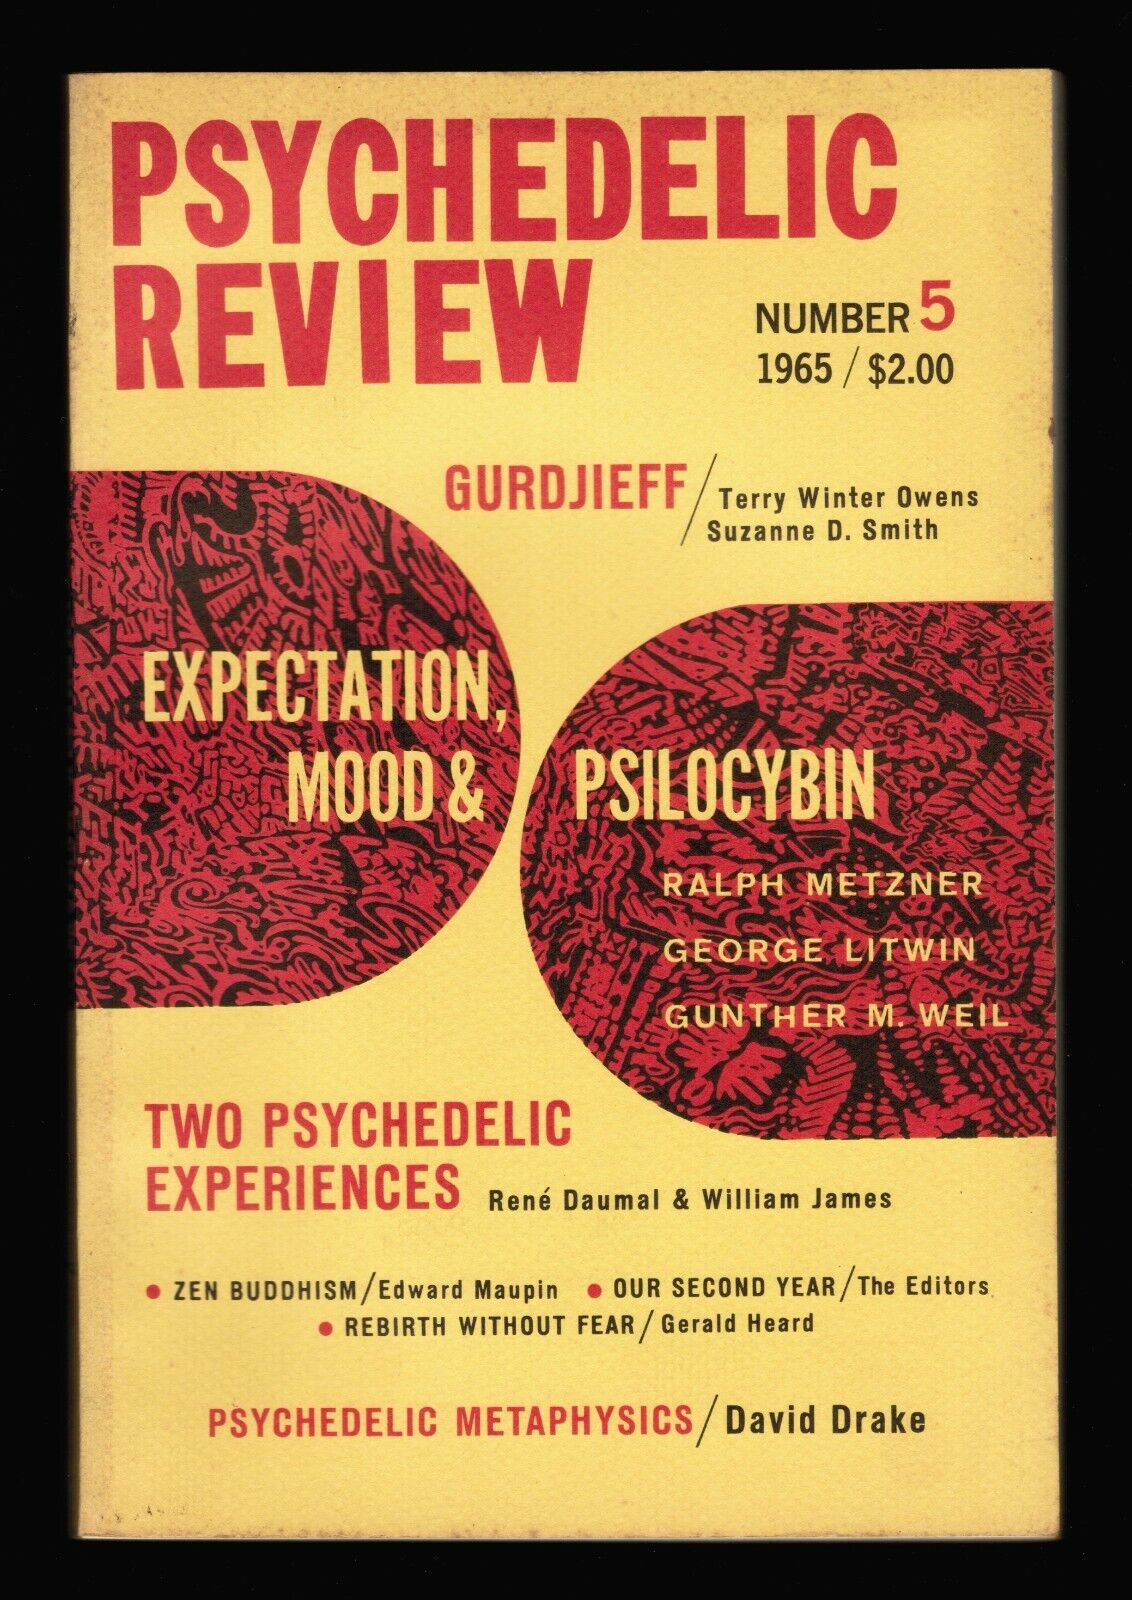 The Psychedelic Review Vol. 1 No. 5 -1965; Zen Buddhism - Mushrooms - Gurdjieff